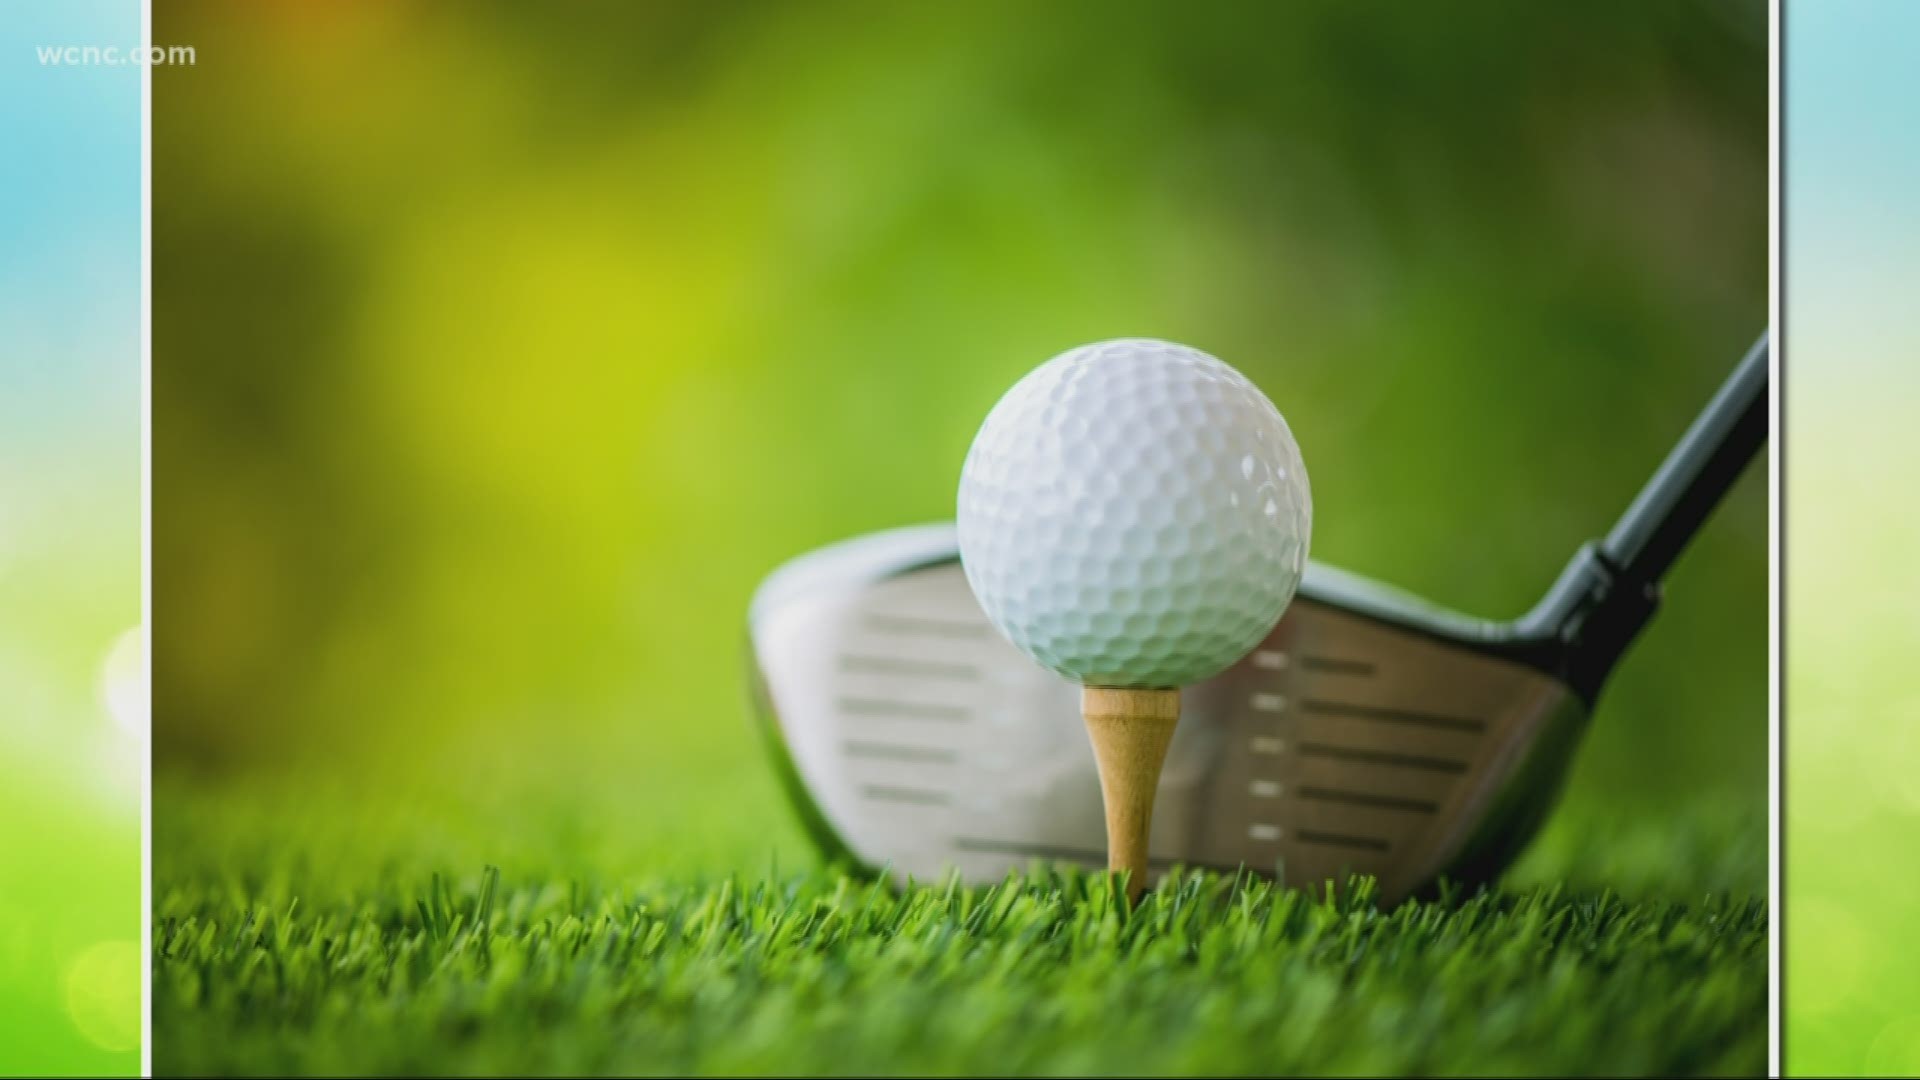 Study: Playing golf may help older adults live longer